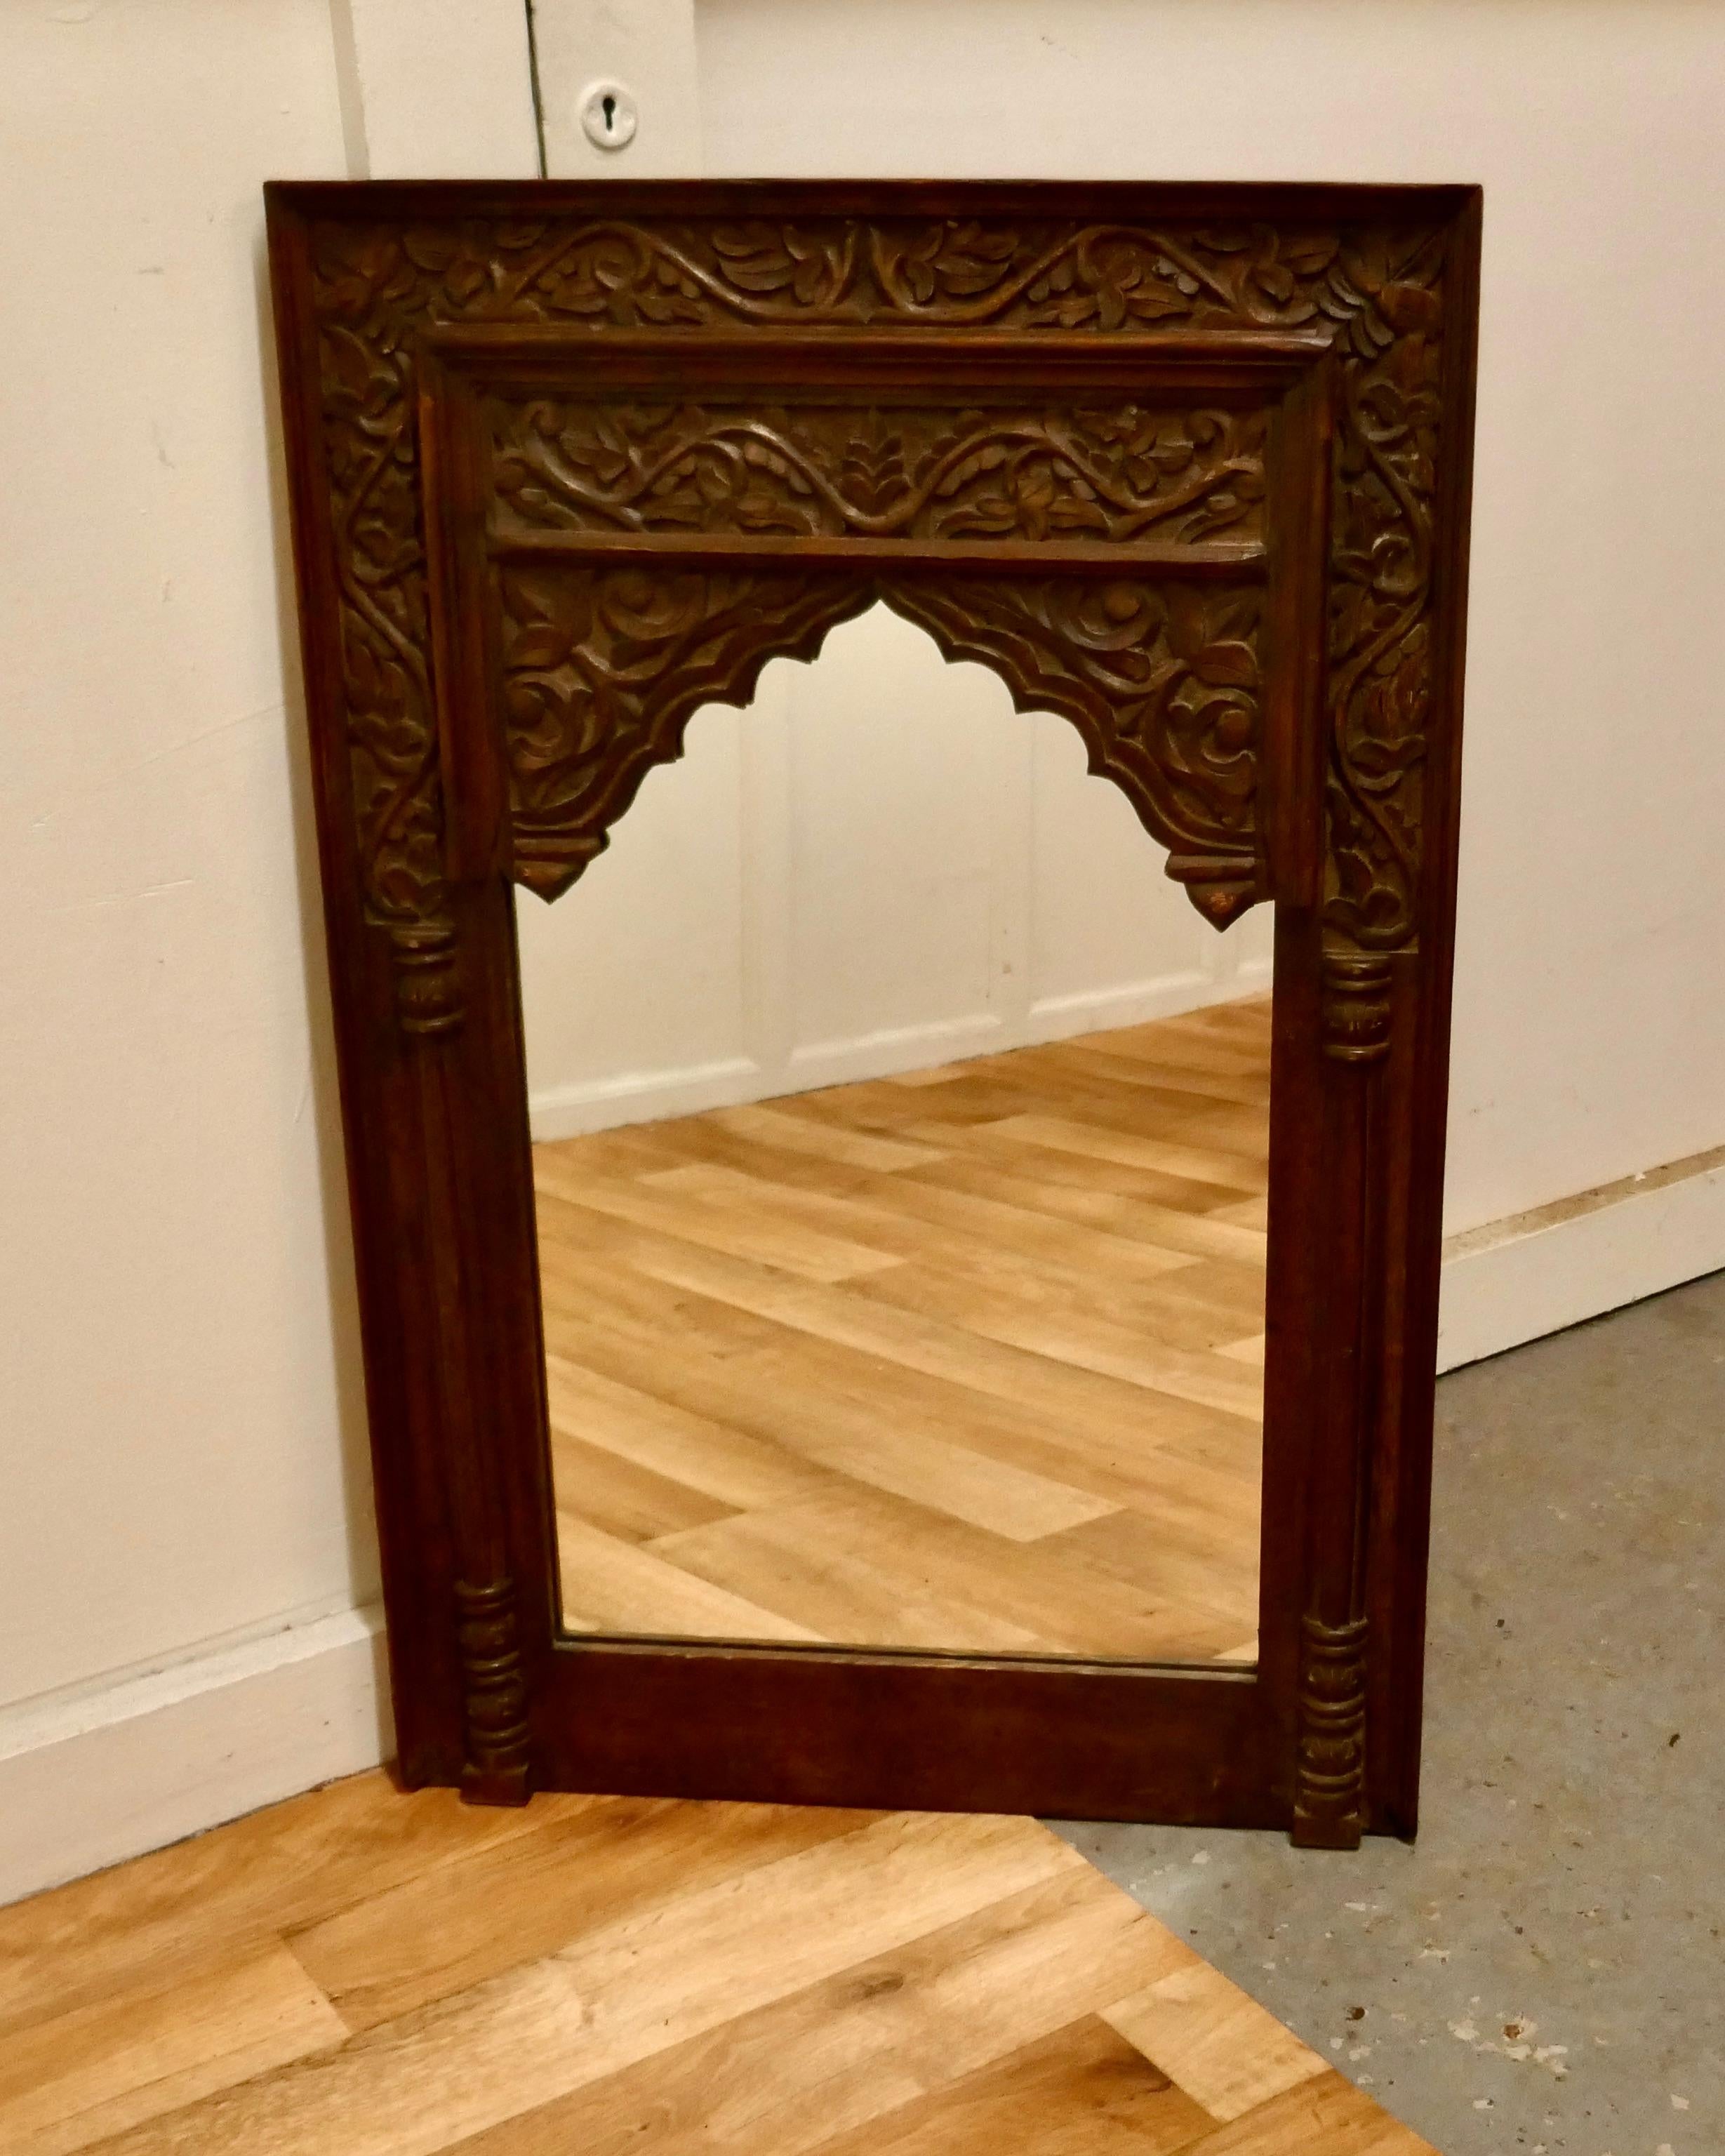 Carved Indian teak mirror

A lovely piece from the east, the wide frame is carved with leaves and fruits, the looking glass is new
A lovely piece with an Islamic look
The Mirror is 36” high and 24” wide
TAC139.